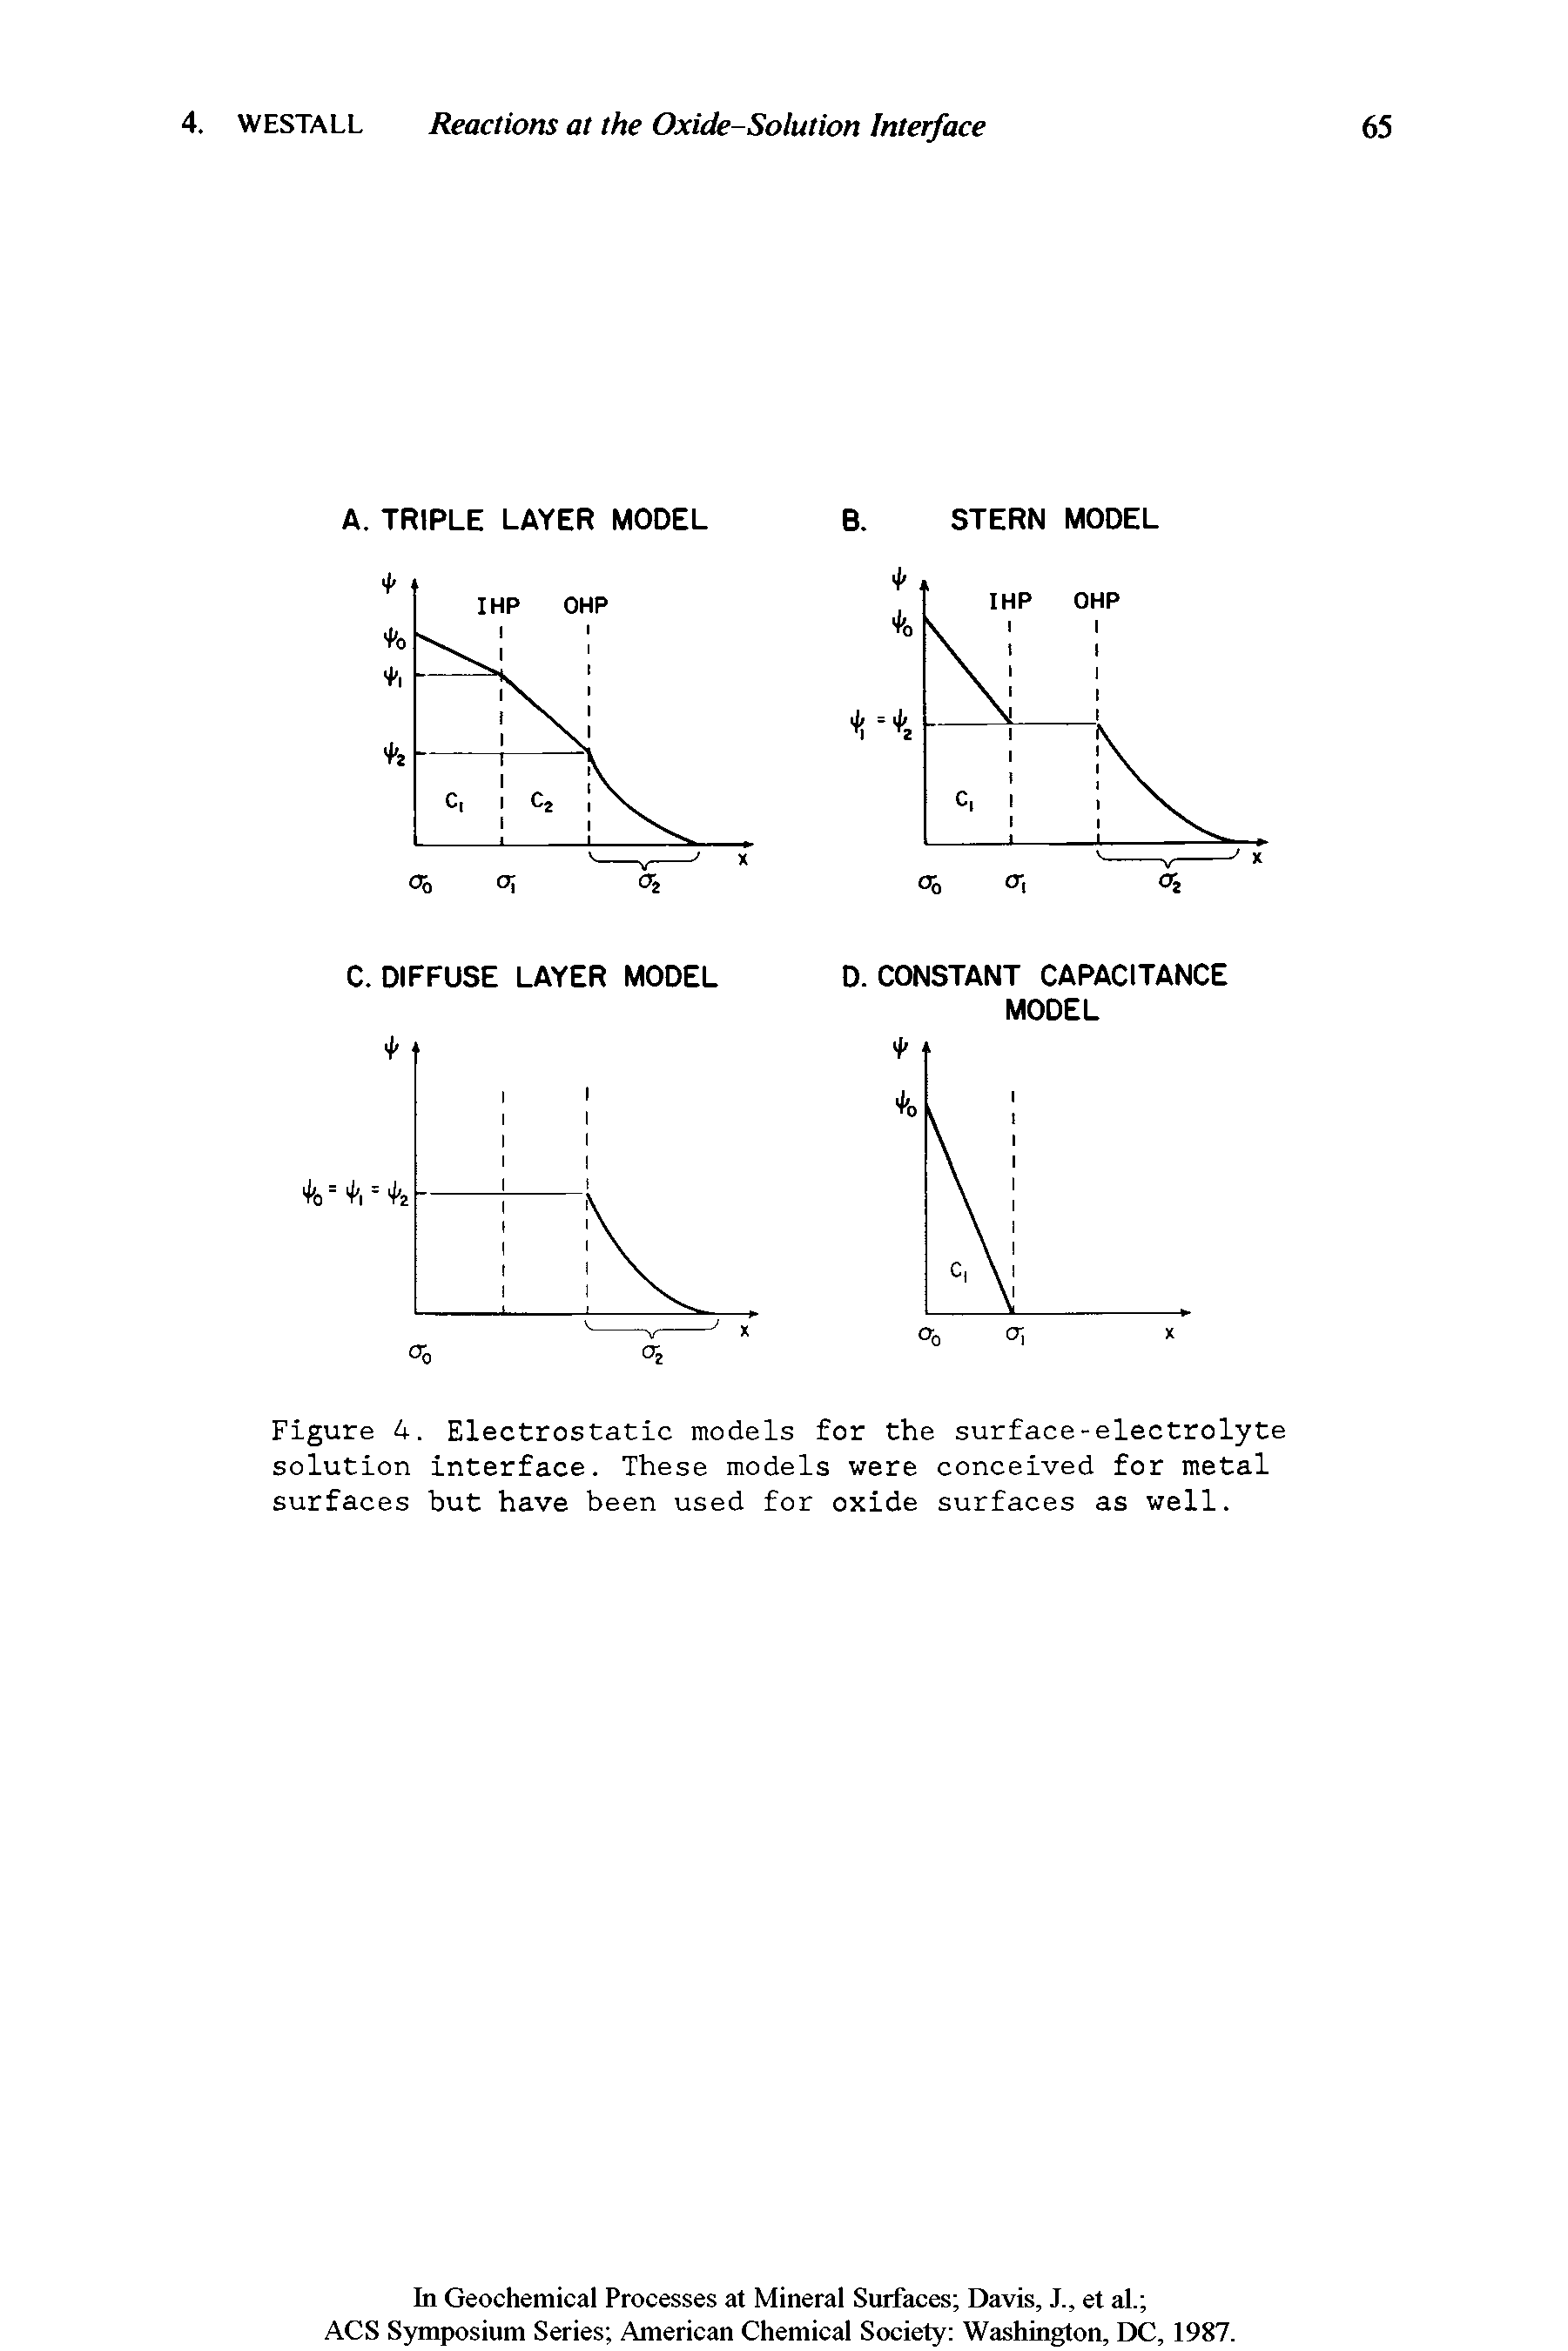 Figure 4. Electrostatic models for the surface-electrolyte solution interface. These models were conceived for metal surfaces but have been used for oxide surfaces as well.